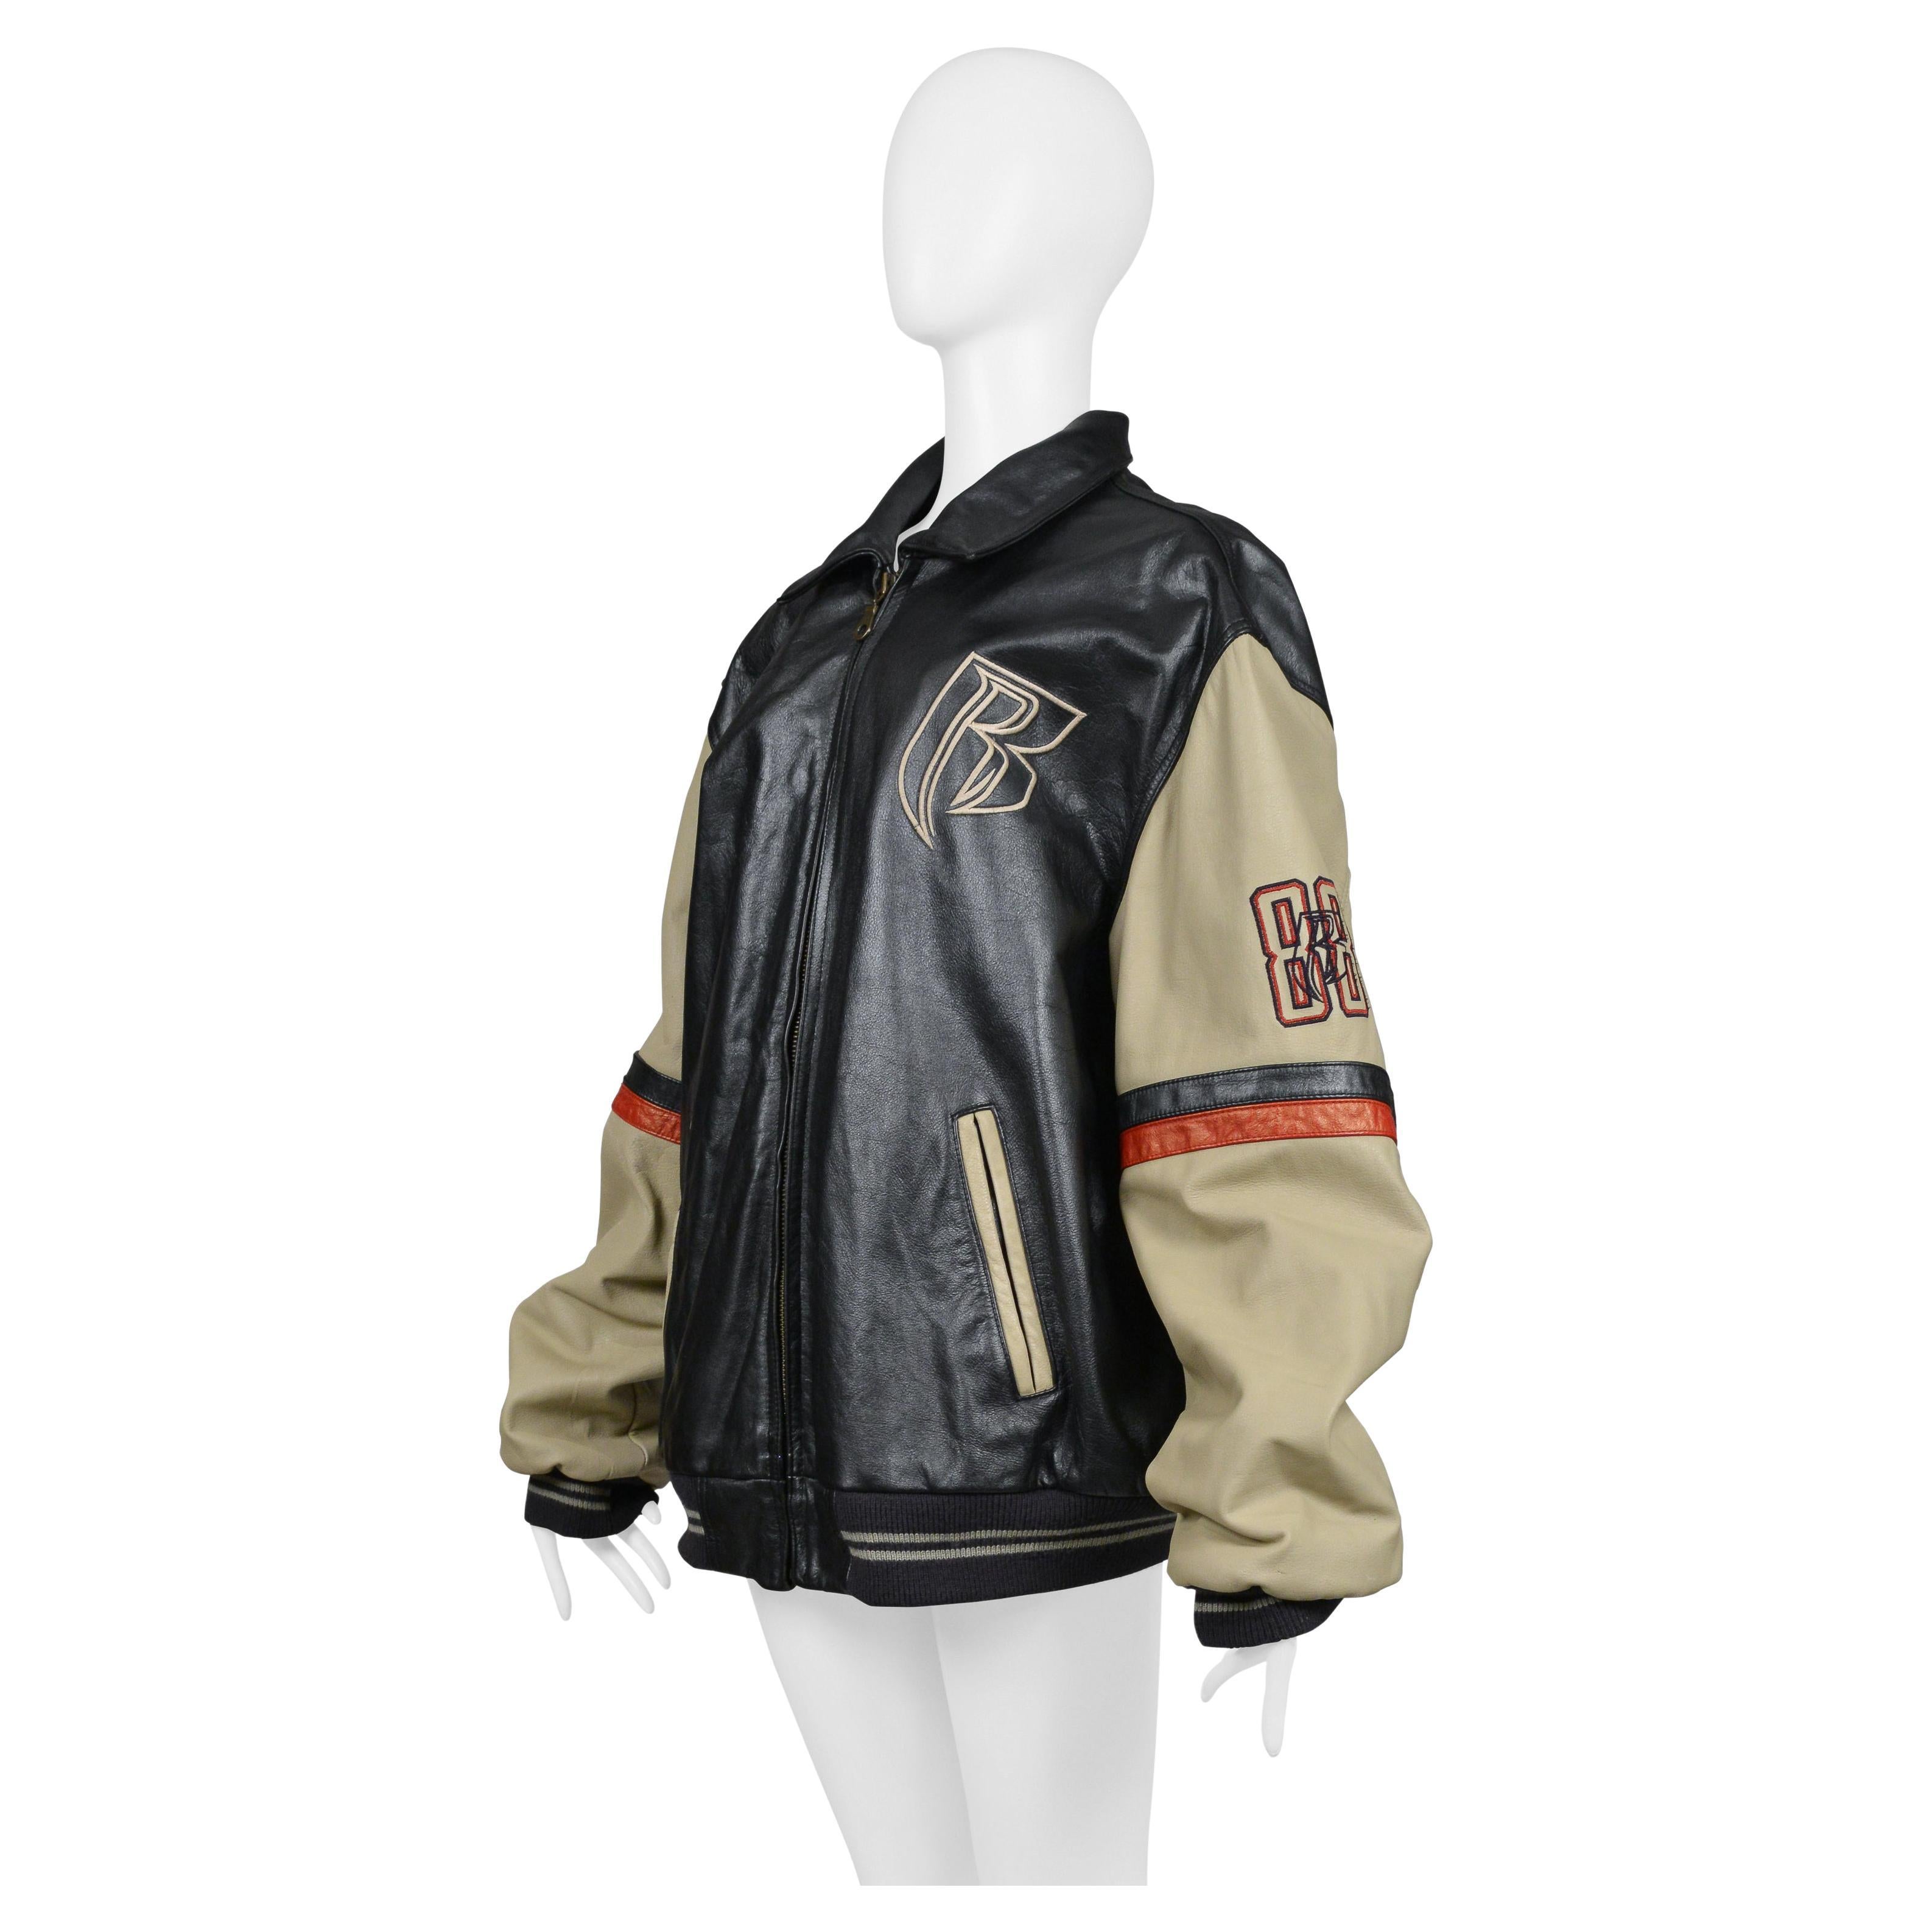 Ruff Ryders Unisex Leather Bomber Jacket In Excellent Condition For Sale In Los Angeles, CA